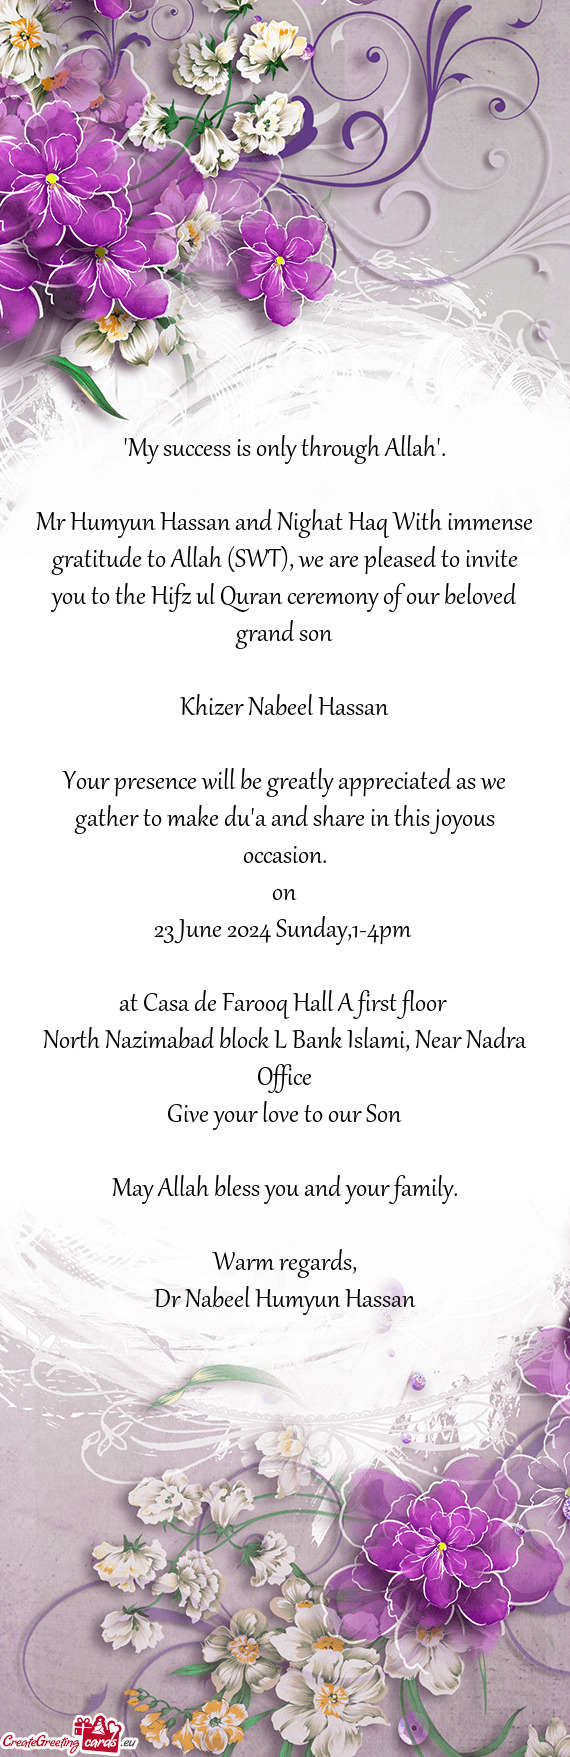 Mr Humyun Hassan and Nighat Haq With immense gratitude to Allah (SWT), we are pleased to invite you